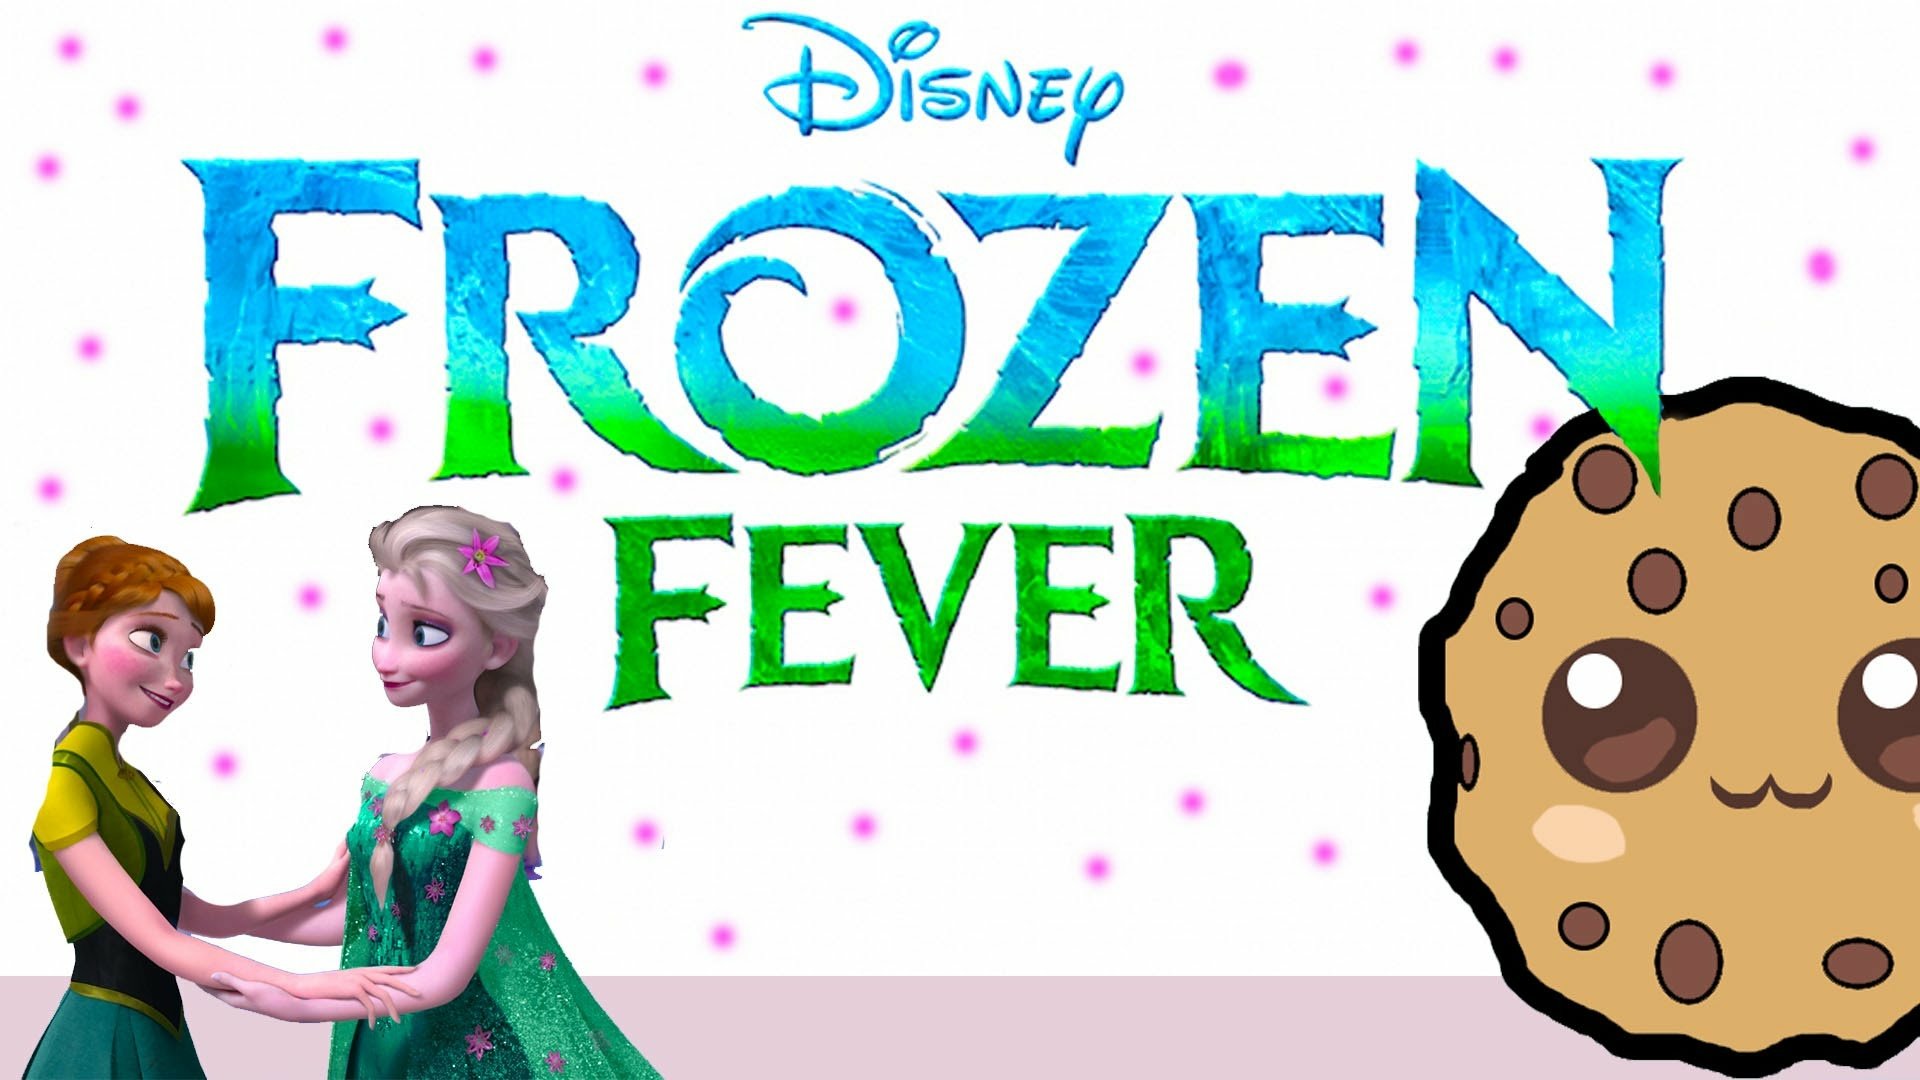 frozen fever full movie download free hd